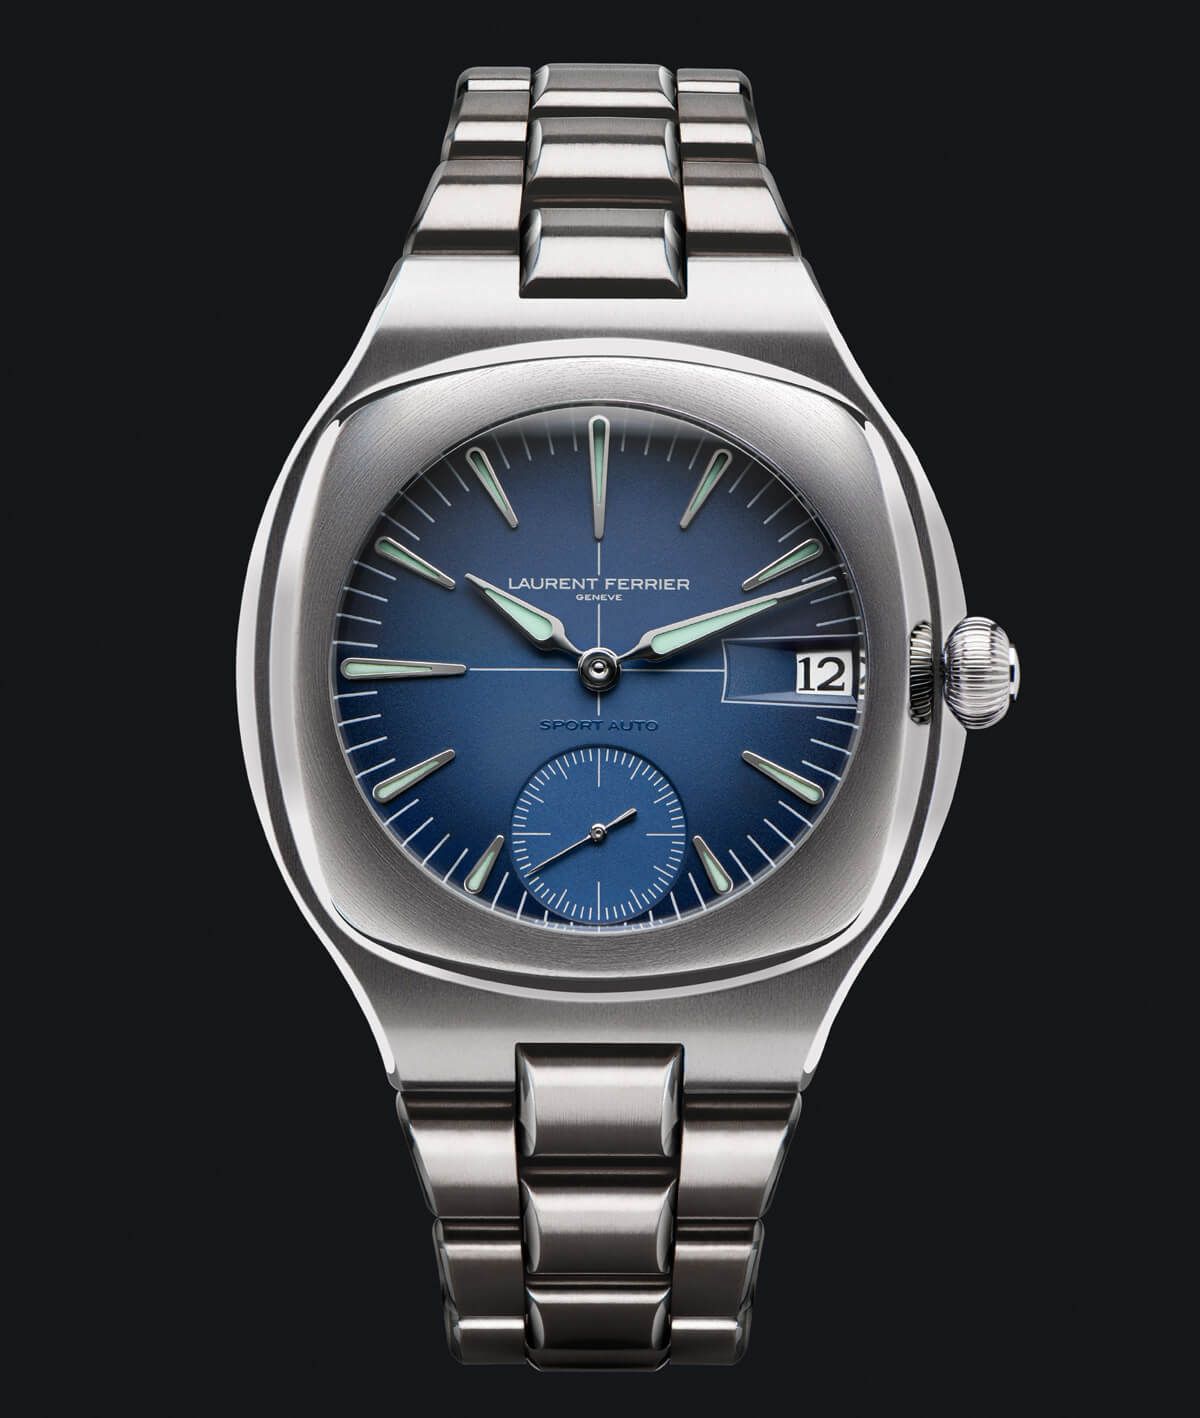 Laurent Ferrier Sport Auto In Multi Opaline Dial | The Hour Markers